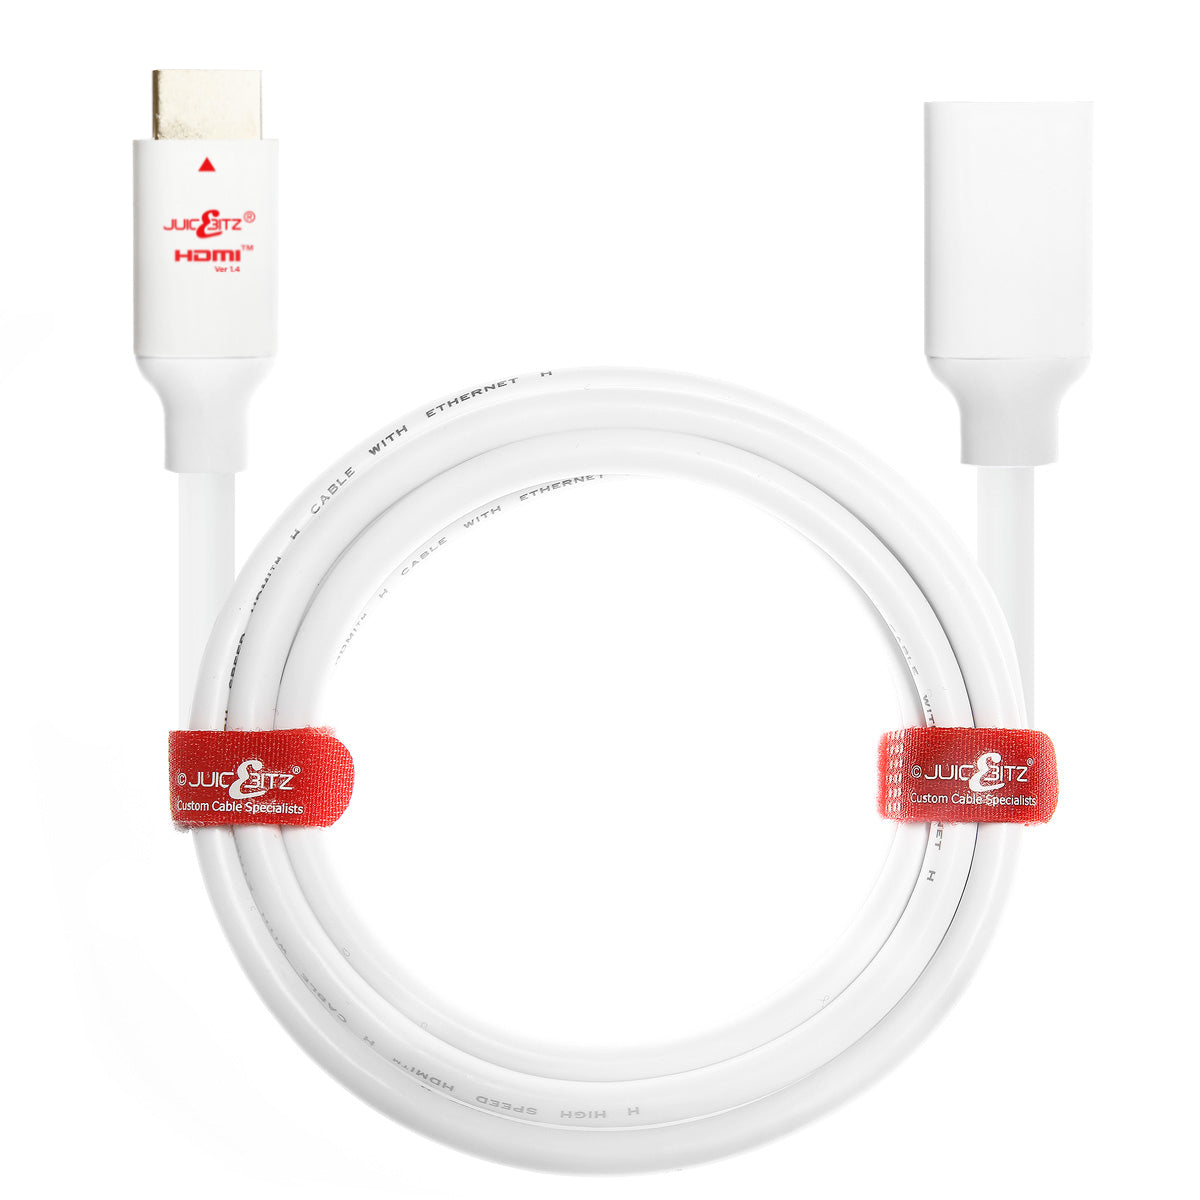 HDMI 1.4 Full HD Male to Female HDMI Extension Cable with Ethernet, CEC, ARC - White